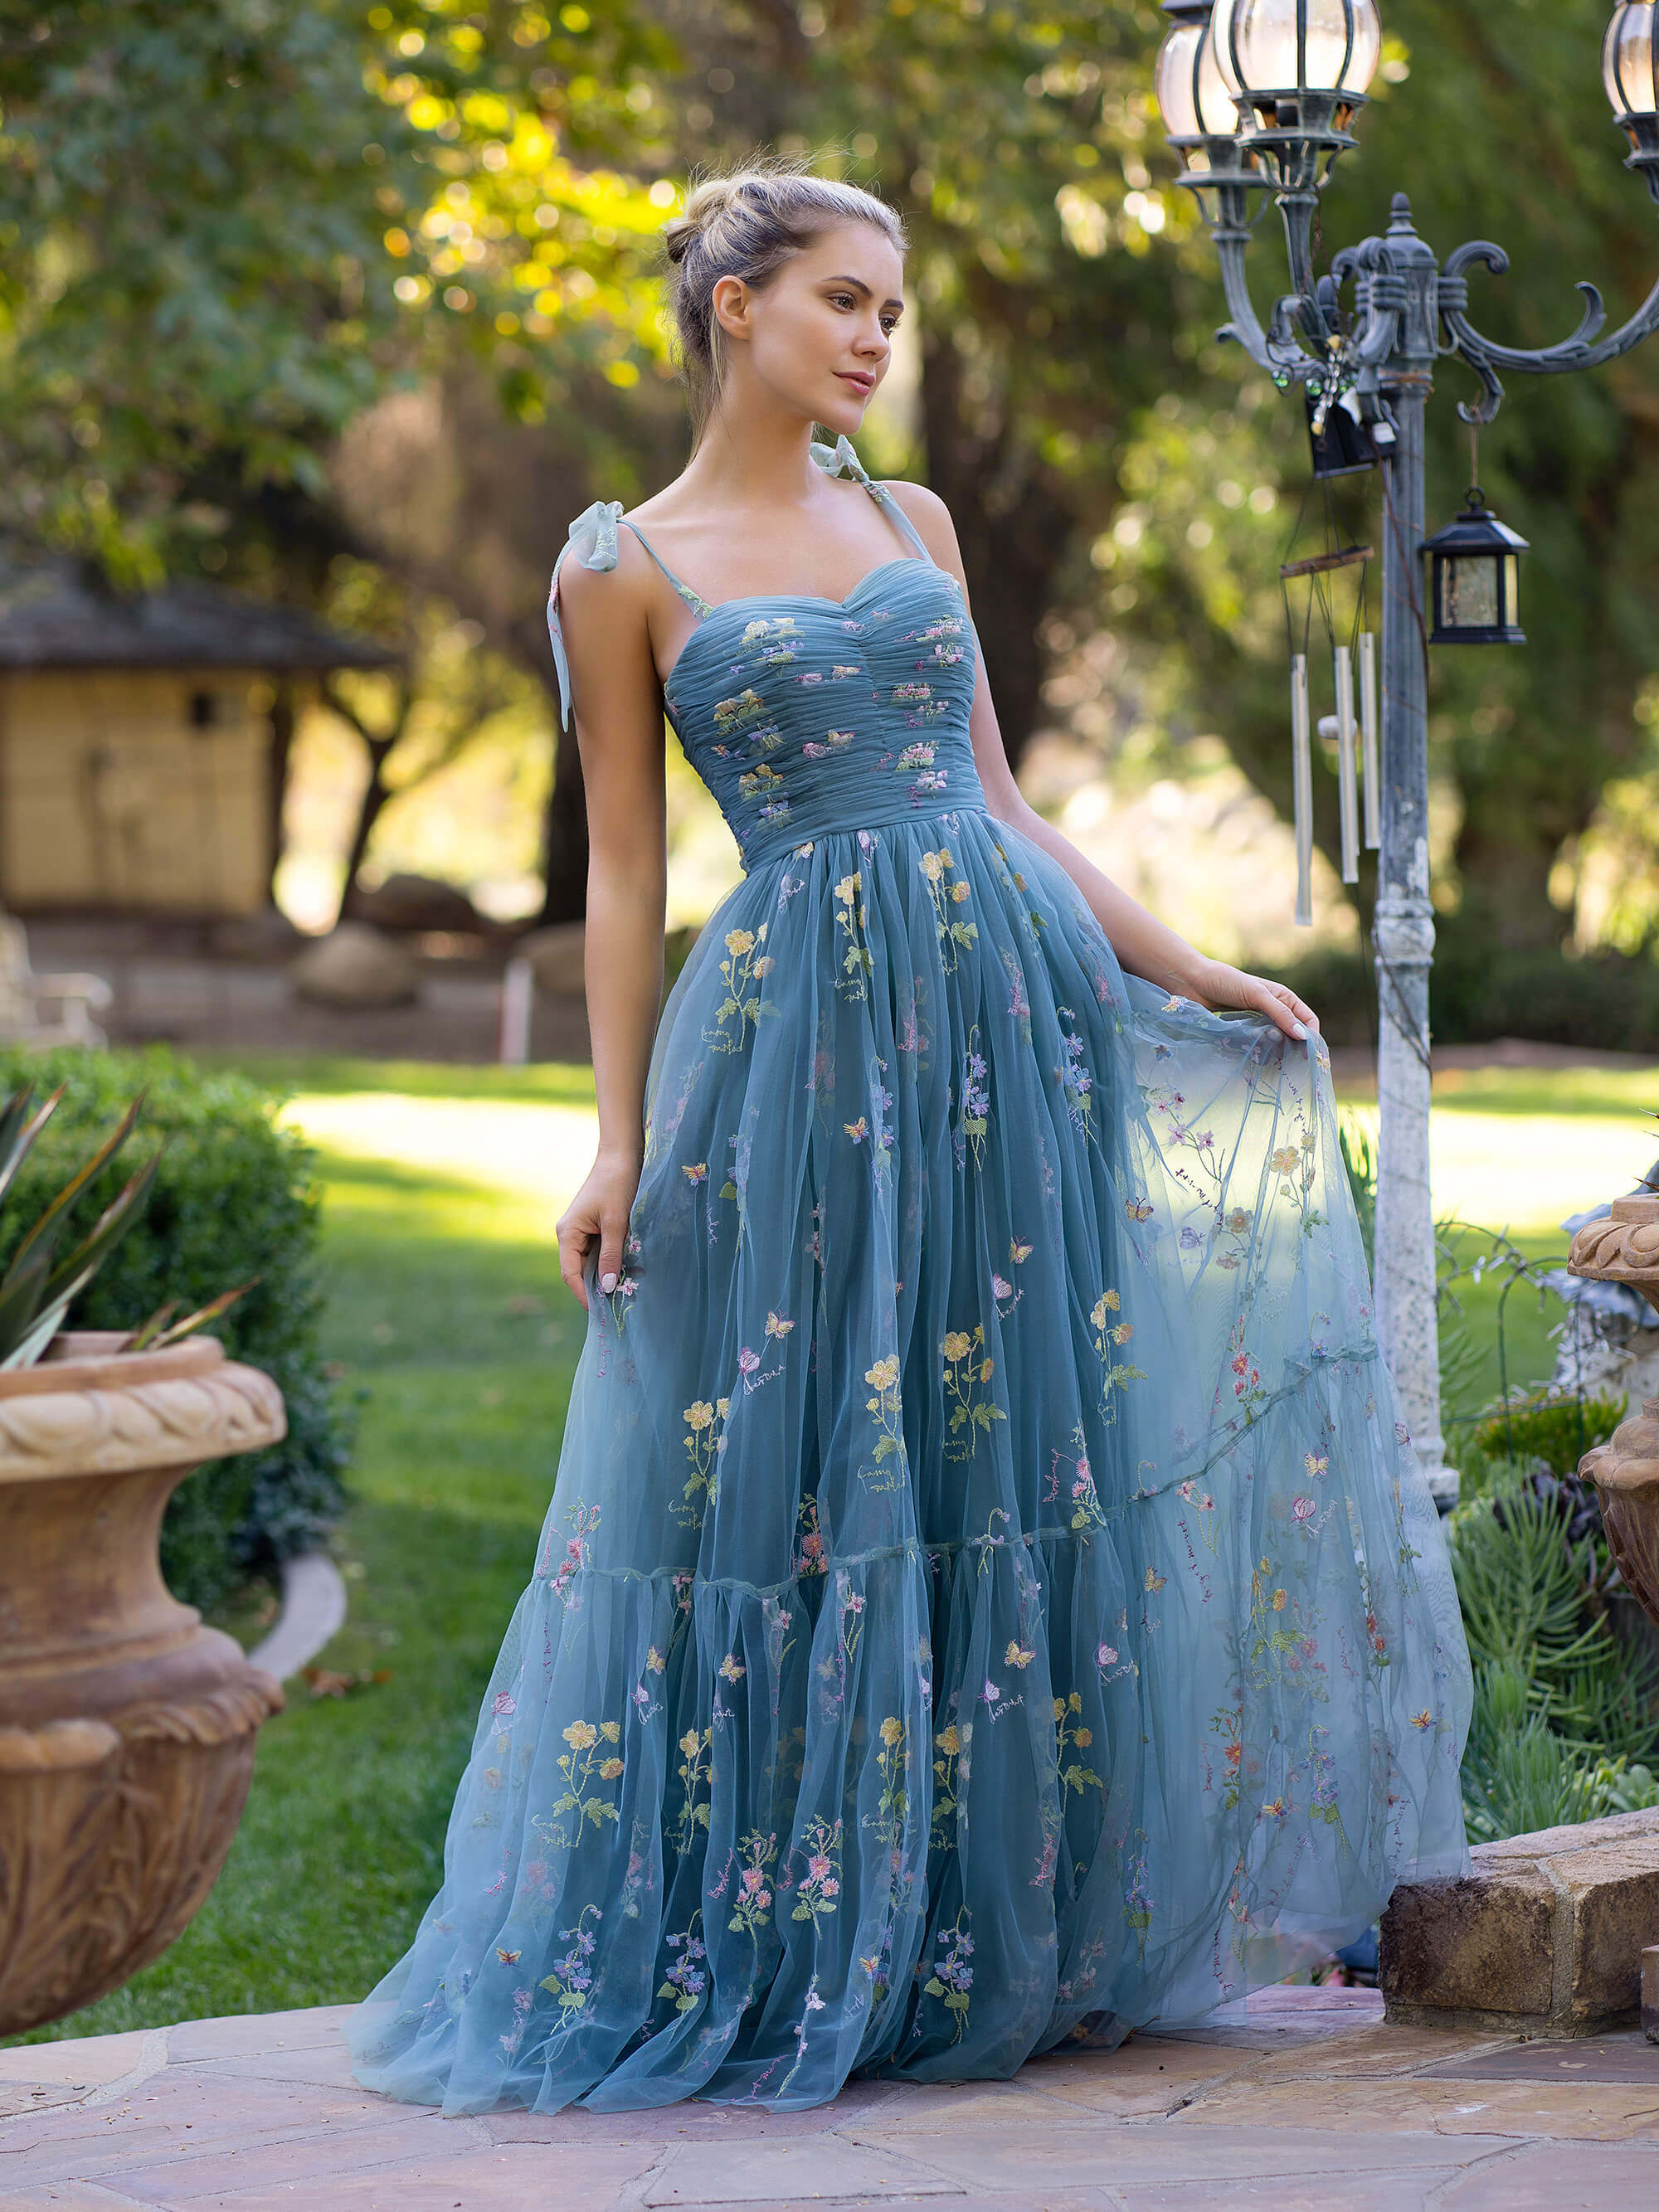 Sky Blue Lace Appliqued Satin and Tulle Prom Dress - VQ